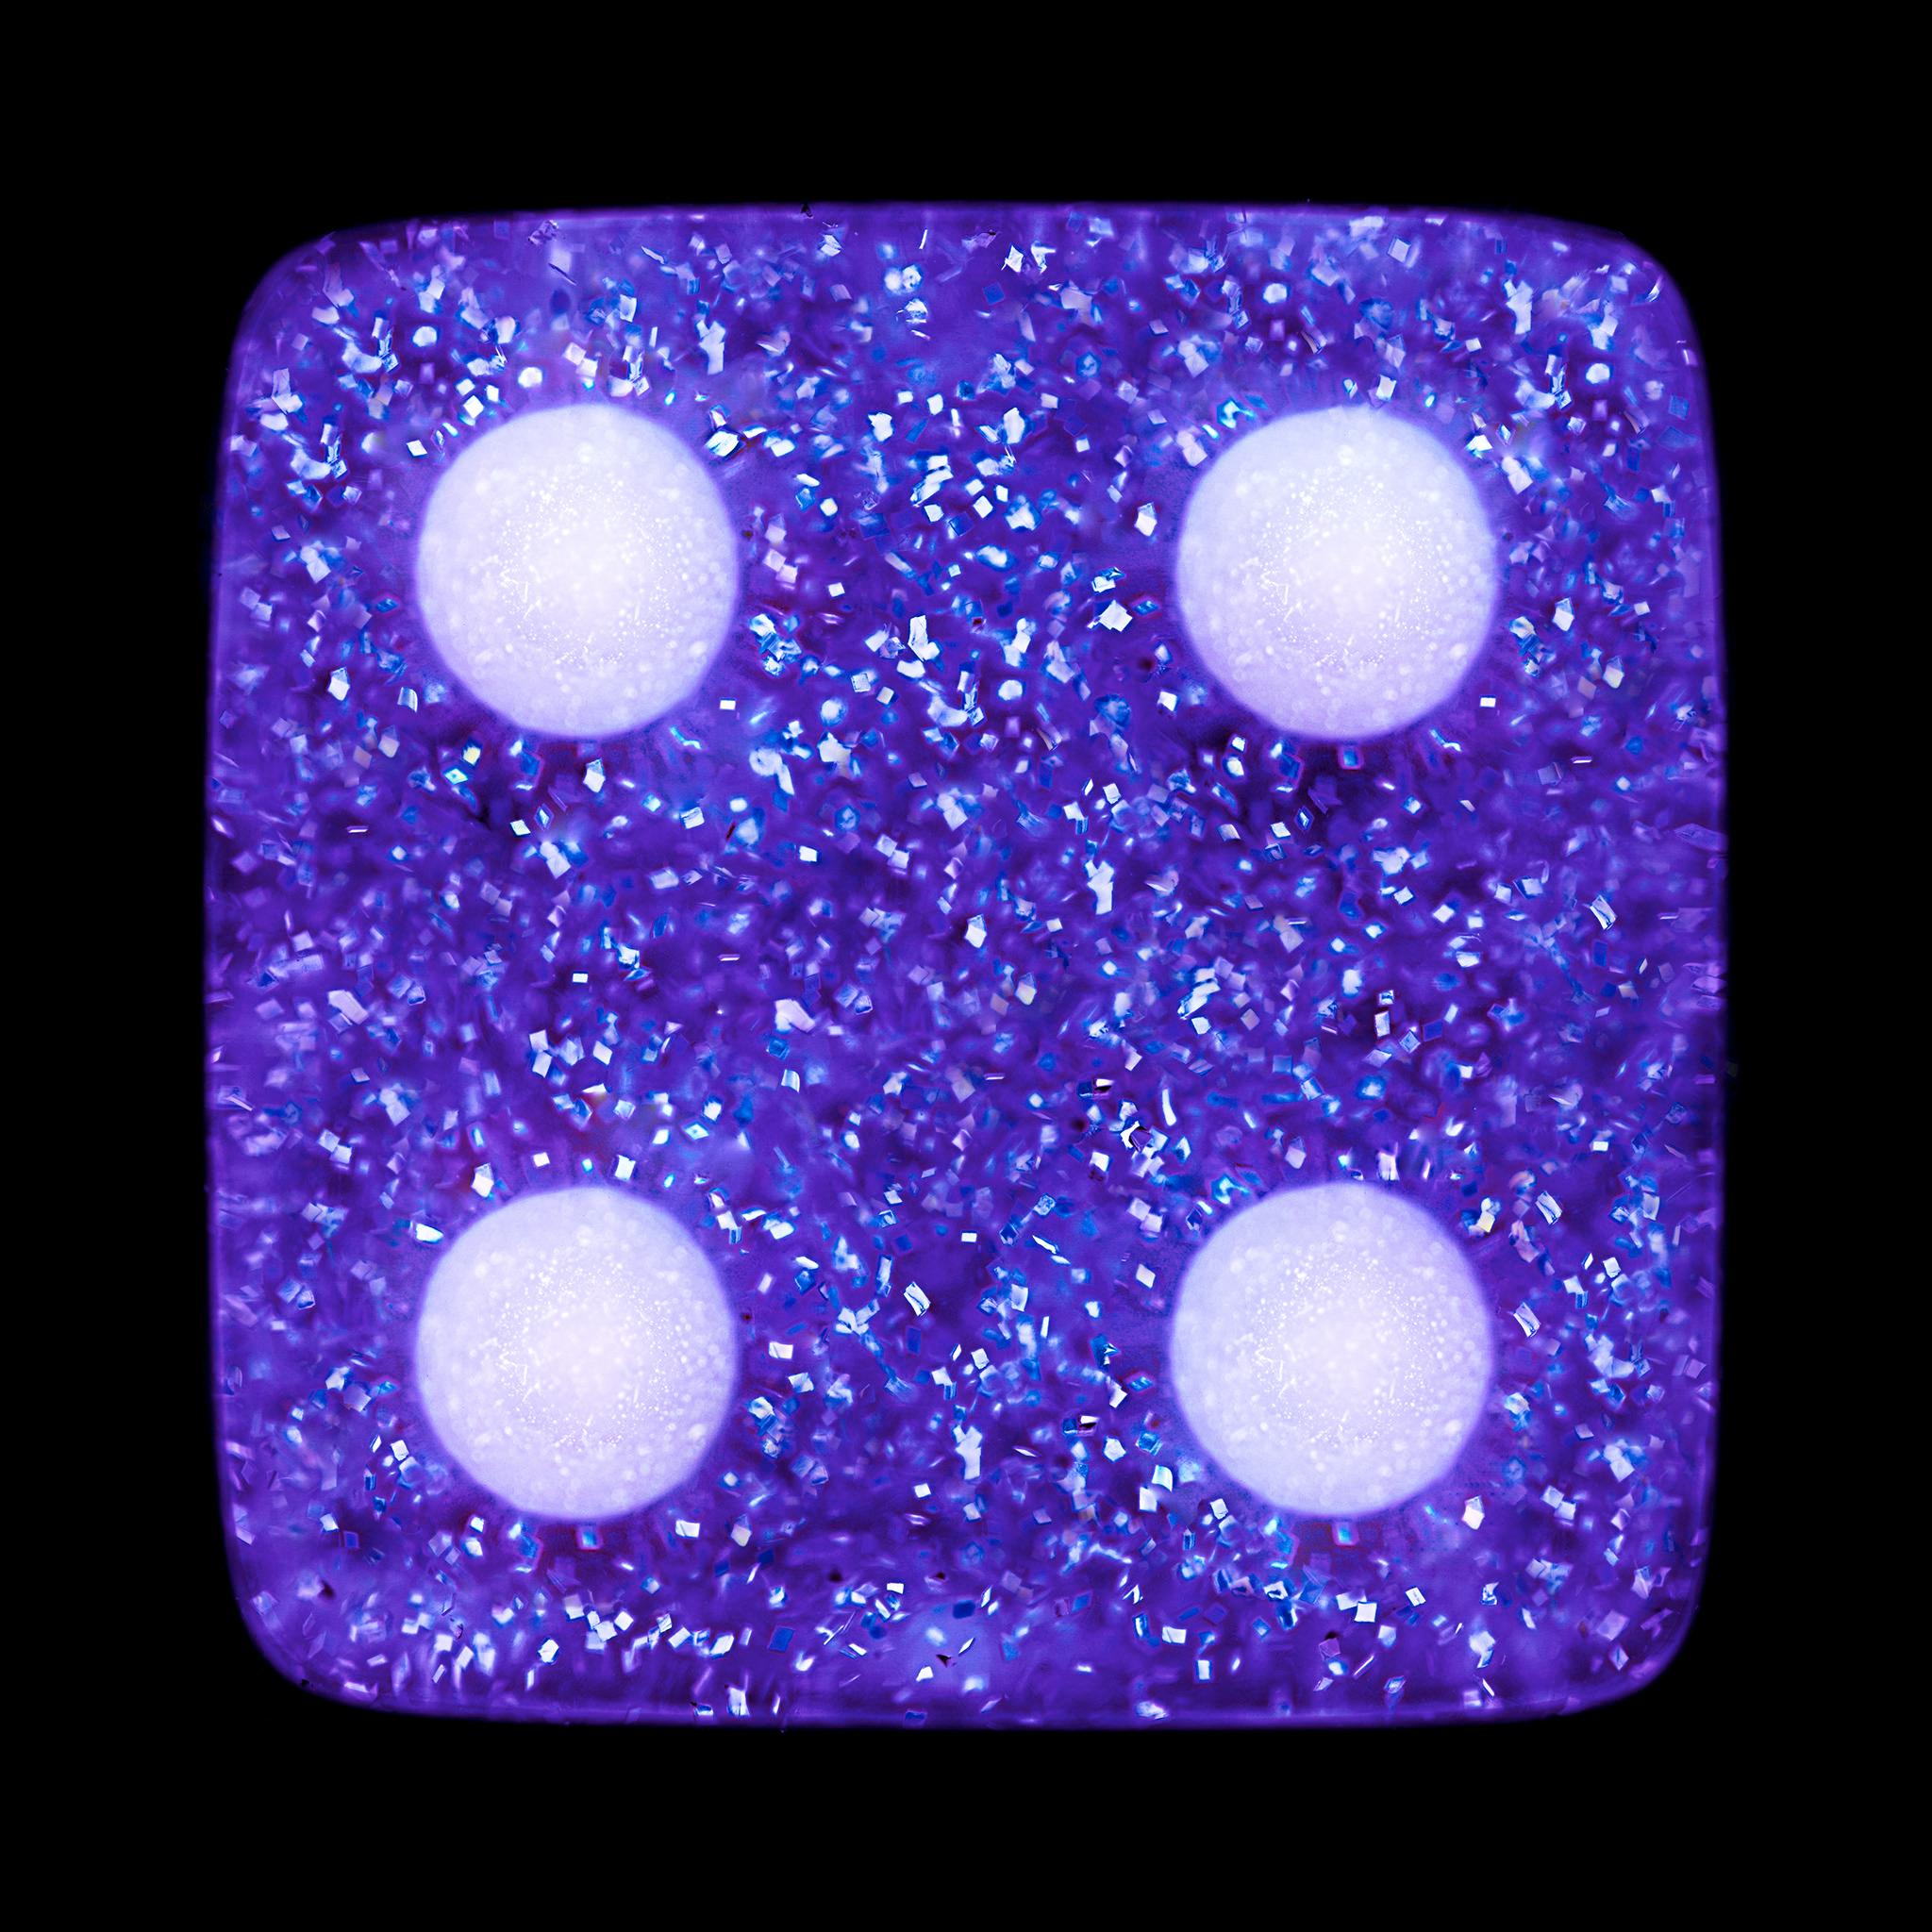 Heidler & Heeps Dice Series - Four Dice Purple Sparkles.

Hypnotically curious in both content and technique, viewers find themselves pleasantly puzzled. Heidler & Heeps have developed their own dichromatic technique resulting in something, which is